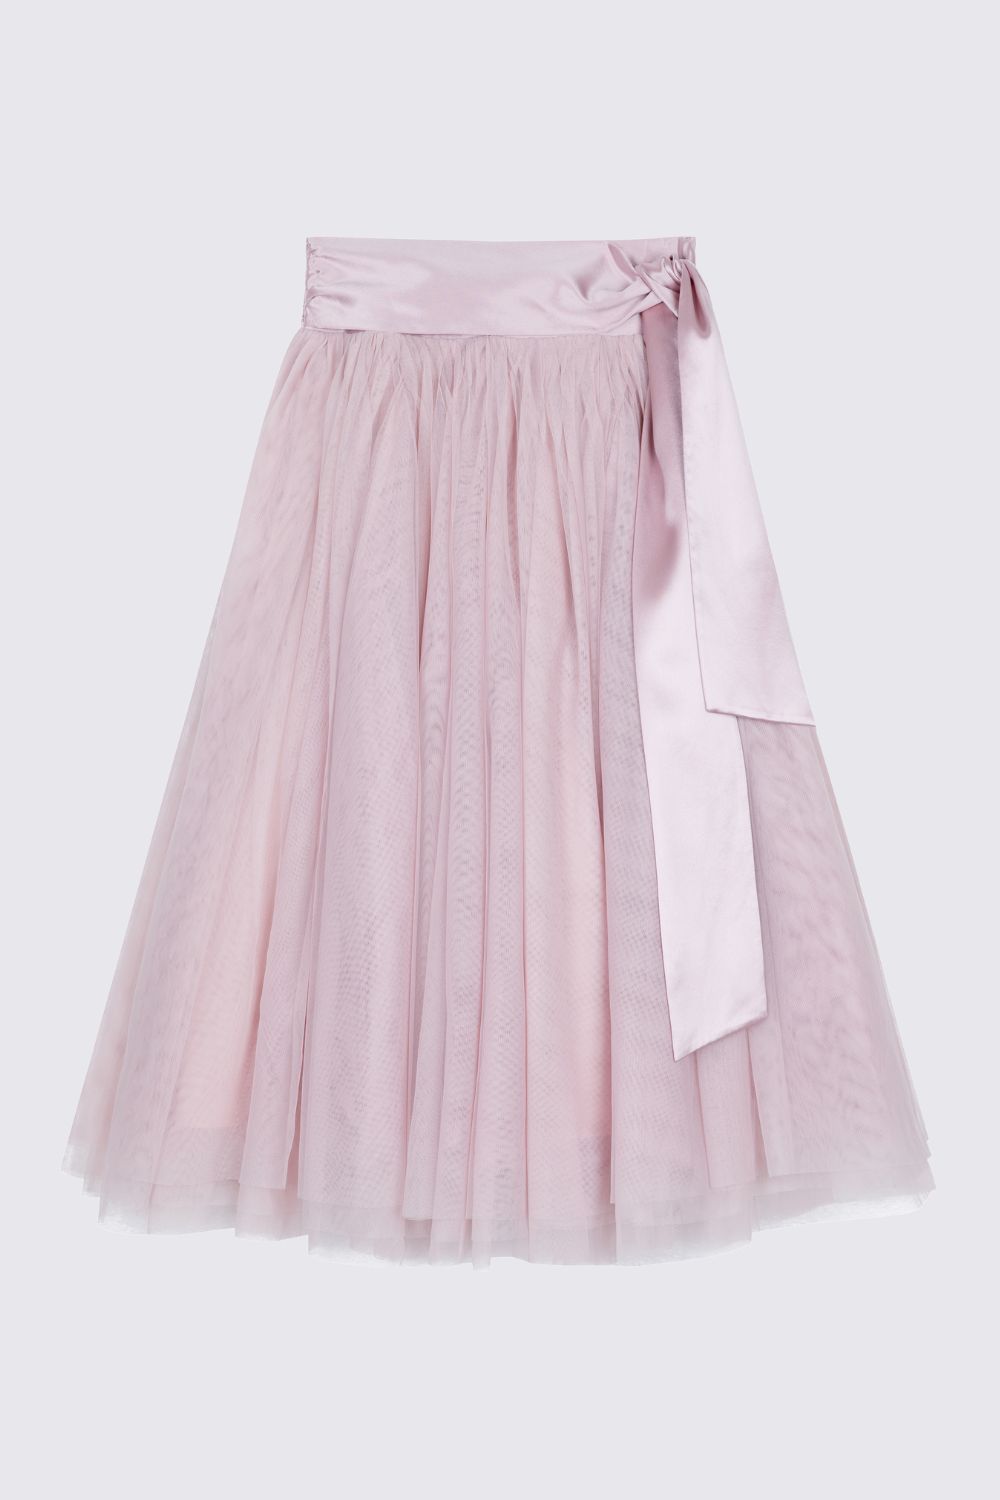 FRAN BACON x ELEVEN LOVES CARRIE TULLE SKIRT (PINK)